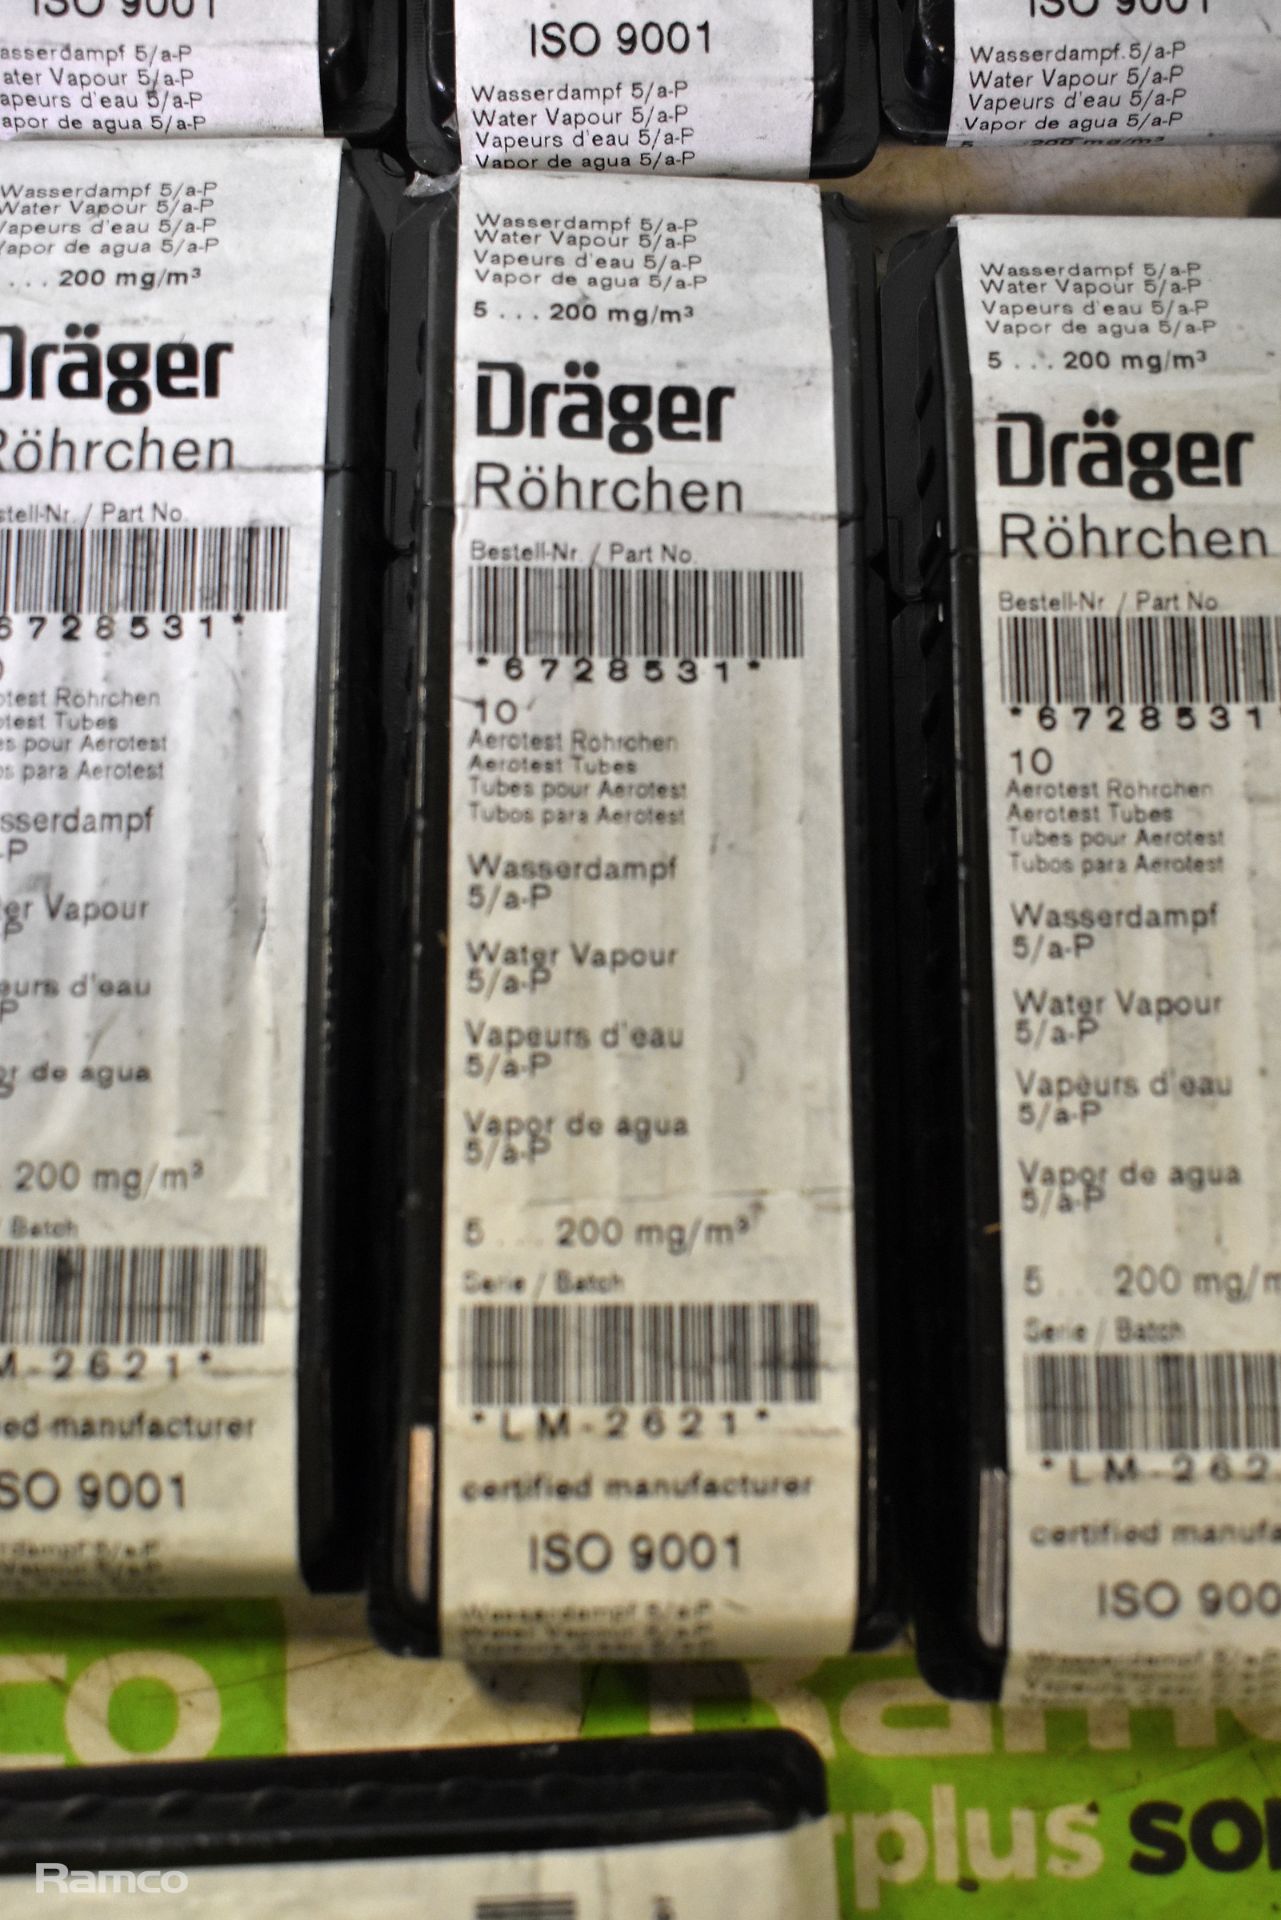 17x Dräger Water Vapour 5/a-P long term gas analysis measuring tubes - 10 per pack (170 total) - Image 3 of 4